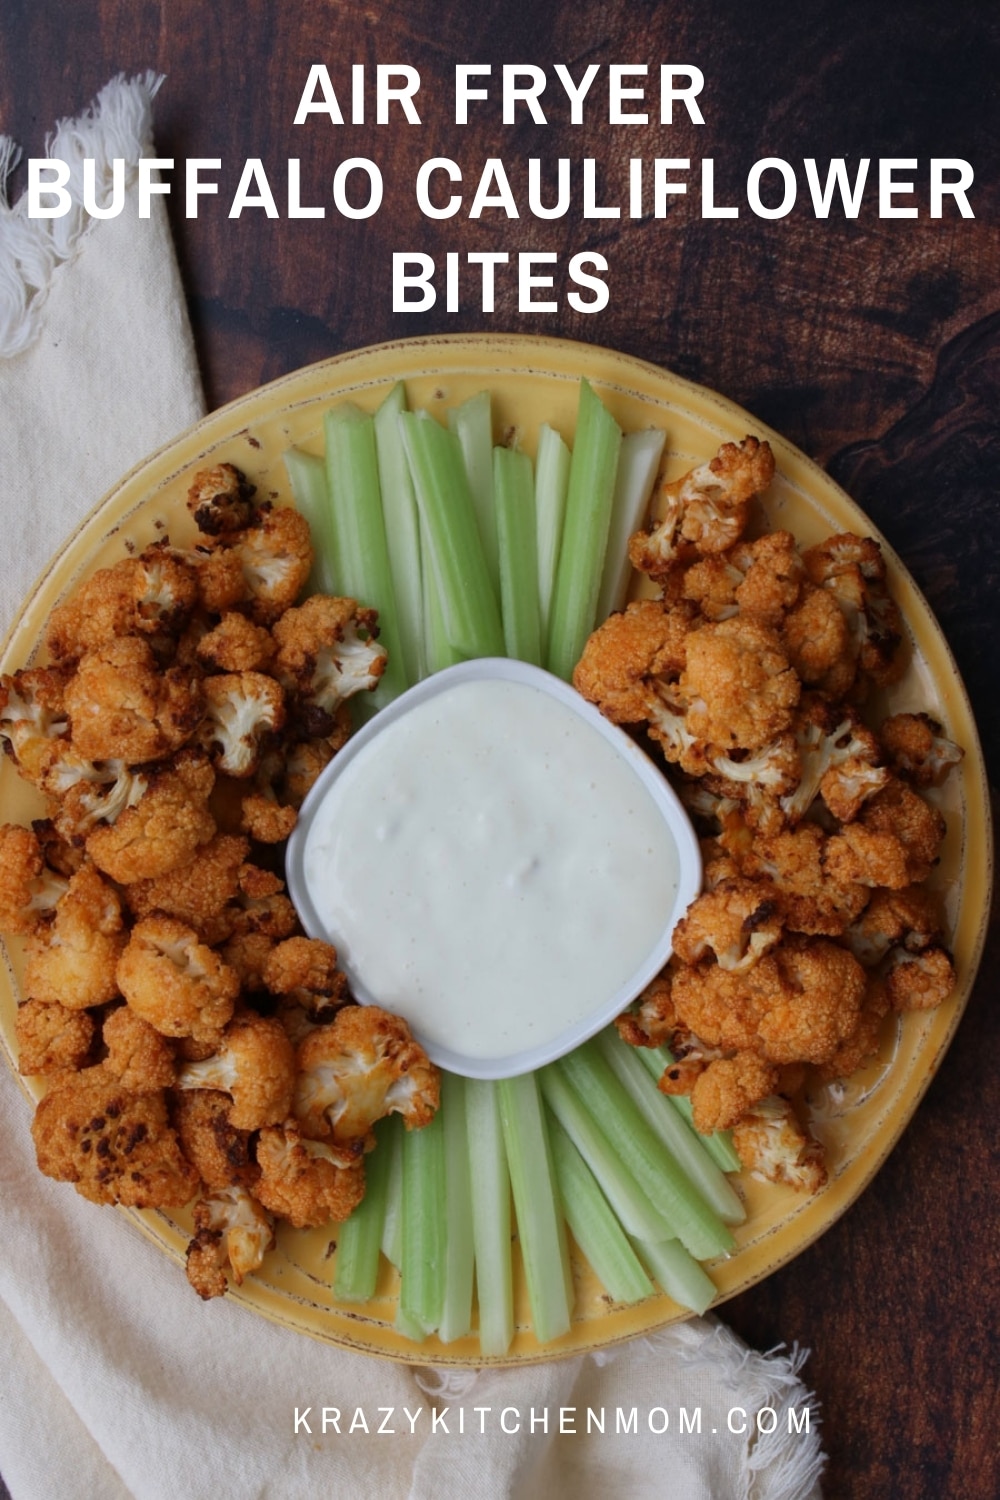 This healthy bite-sized snack is cooked in the air fryer and delivers on big flavor without the heaviness of frying in oil.  via @krazykitchenmom